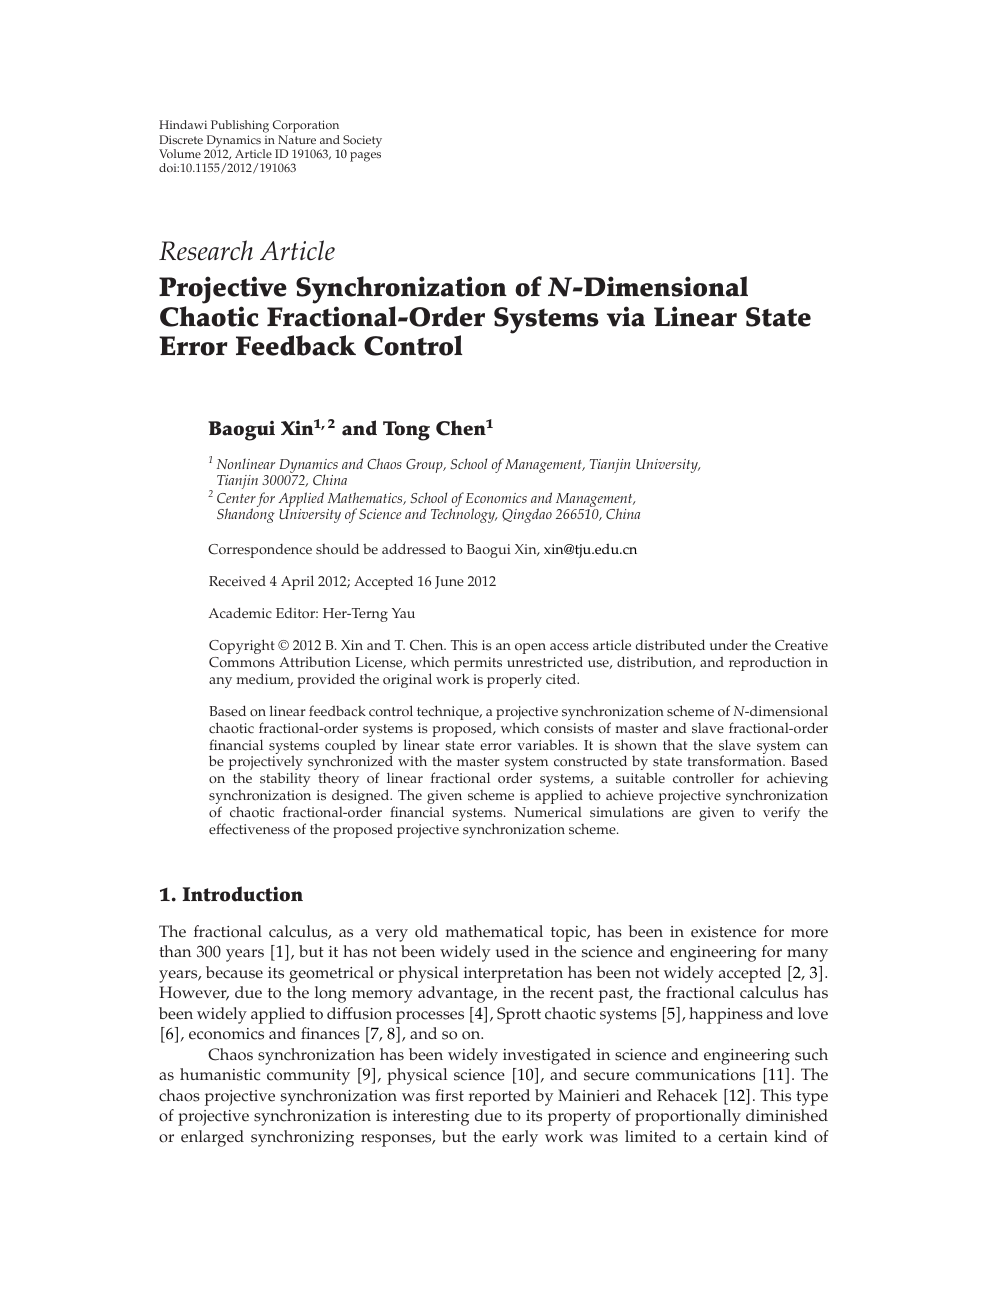 Projective Synchronization Of N Dimensional Chaotic Fractional Order Systems Via Linear State Error Feedback Control Topic Of Research Paper In Mathematics Download Scholarly Article Pdf And Read For Free On Cyberleninka Open